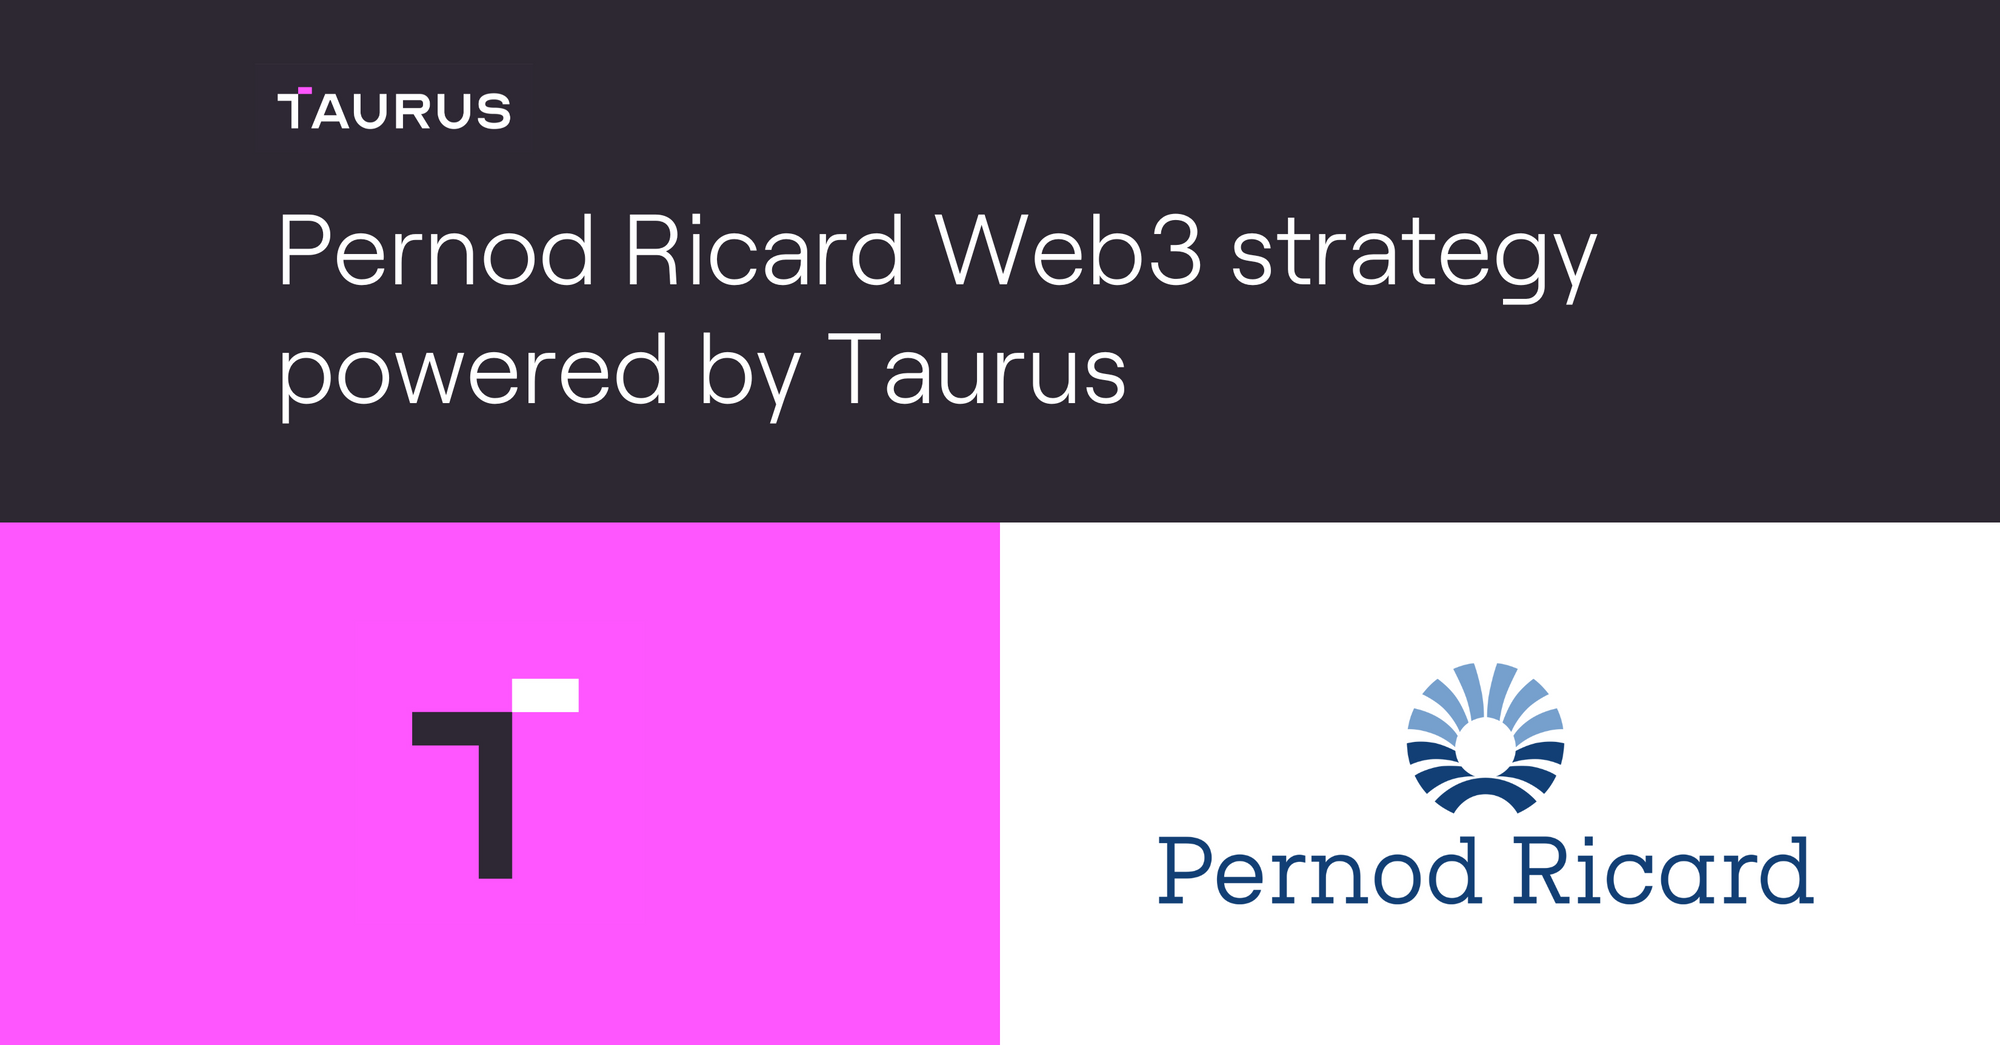 Pernod Ricard Web3 strategy powered by Taurus